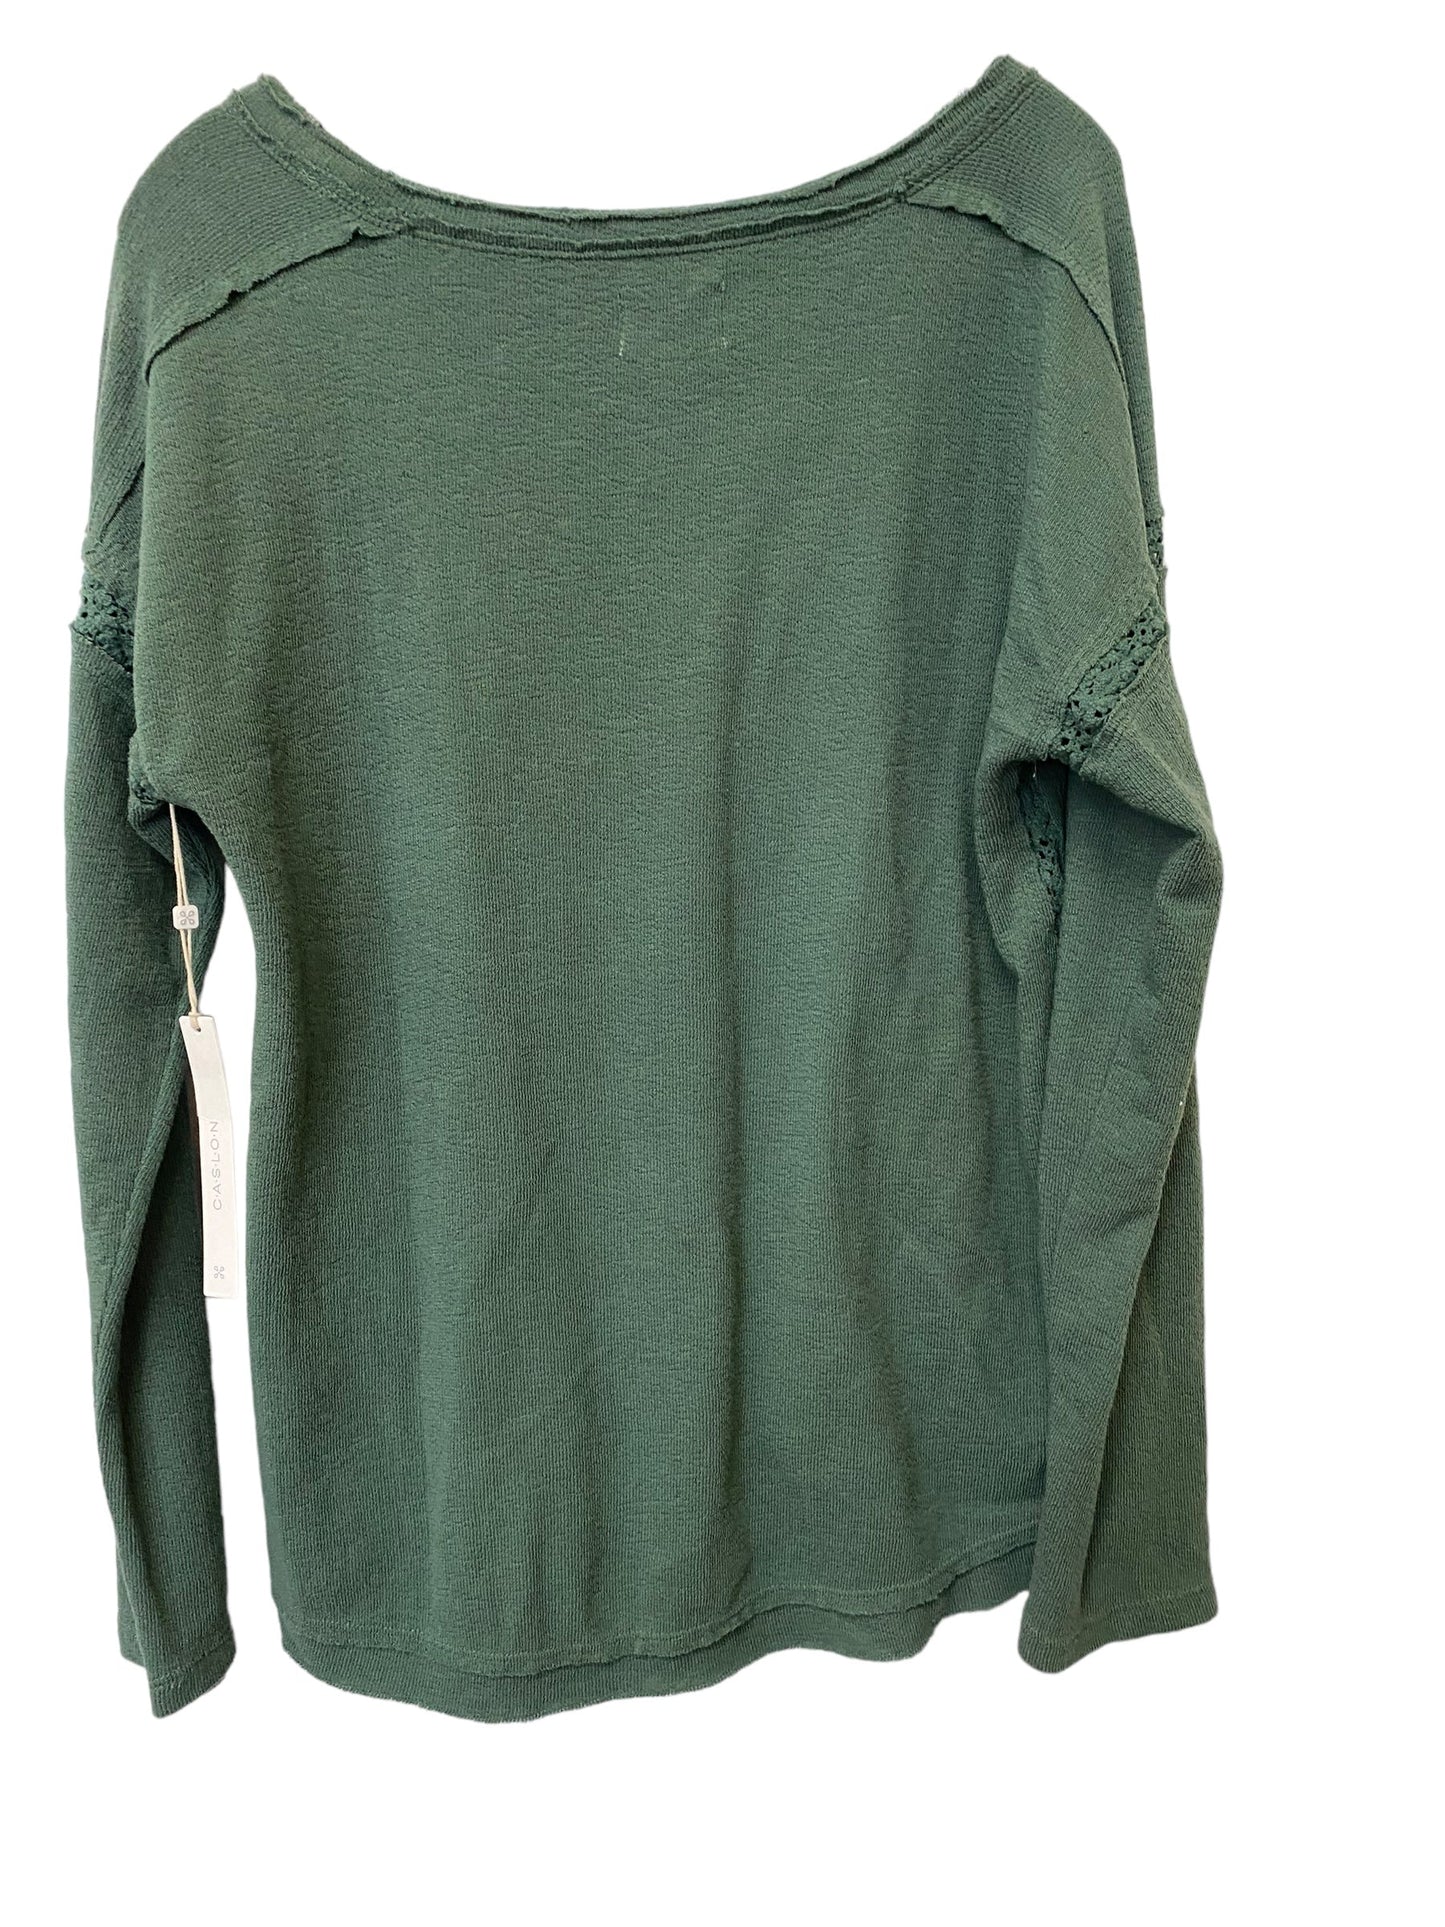 Top Long Sleeve By Caslon  Size: M